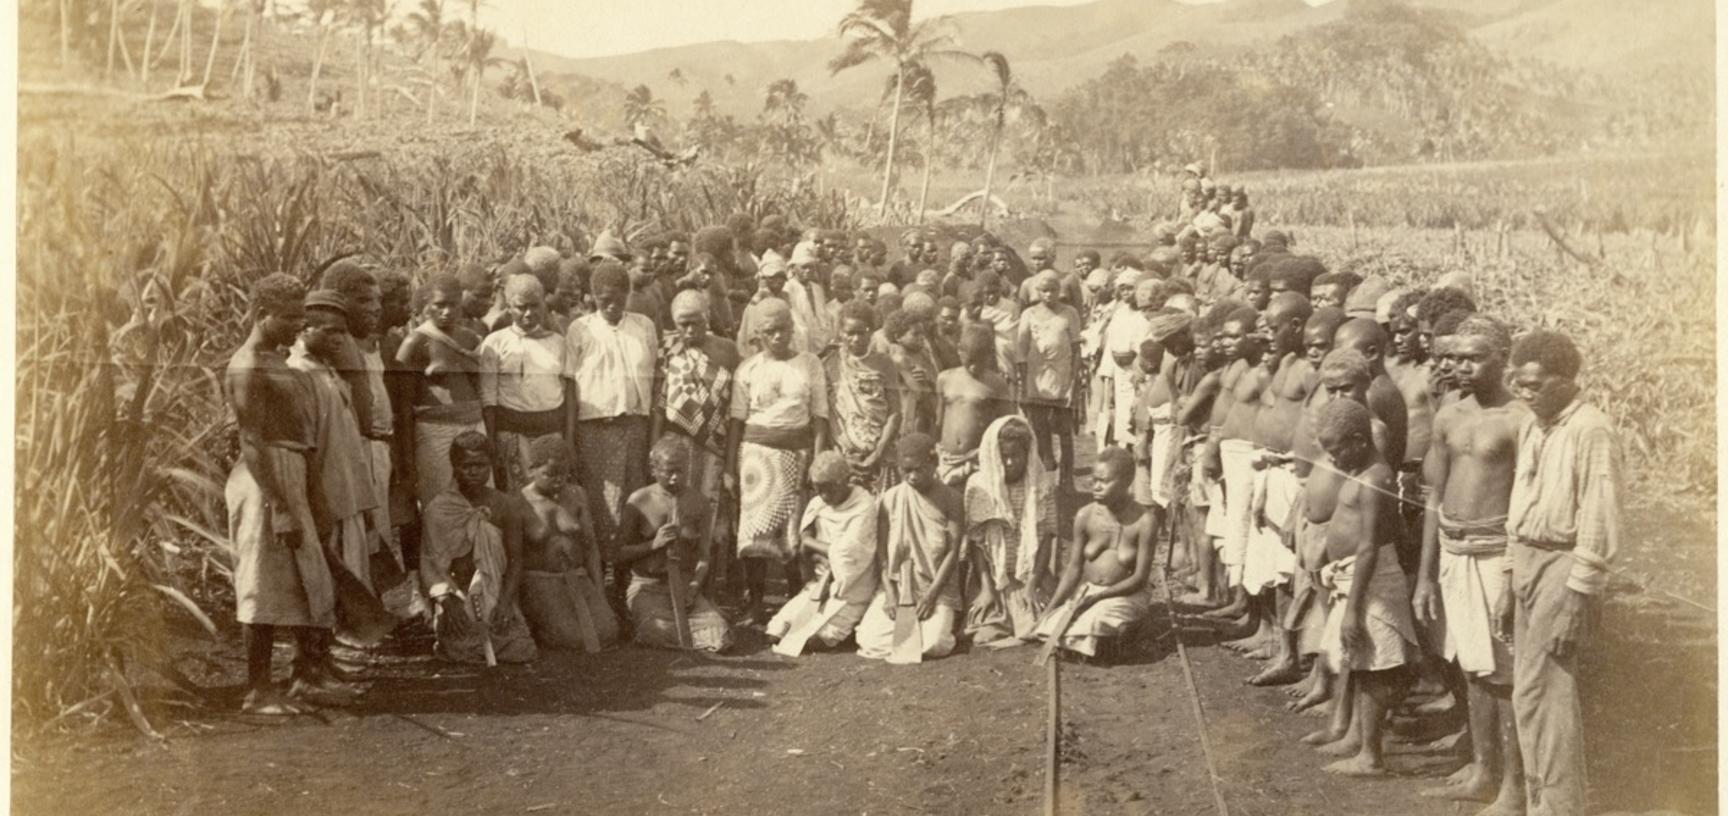 ‘Muster of “labour”’, a group portrait of agricultural workers employed in the sugar cane plantations on Viti Levu. Photograph by Alfred Burton for the Burton Brothers studio (Dunedin). Mango, Viti Levu, Fiji. 16 July 1884.